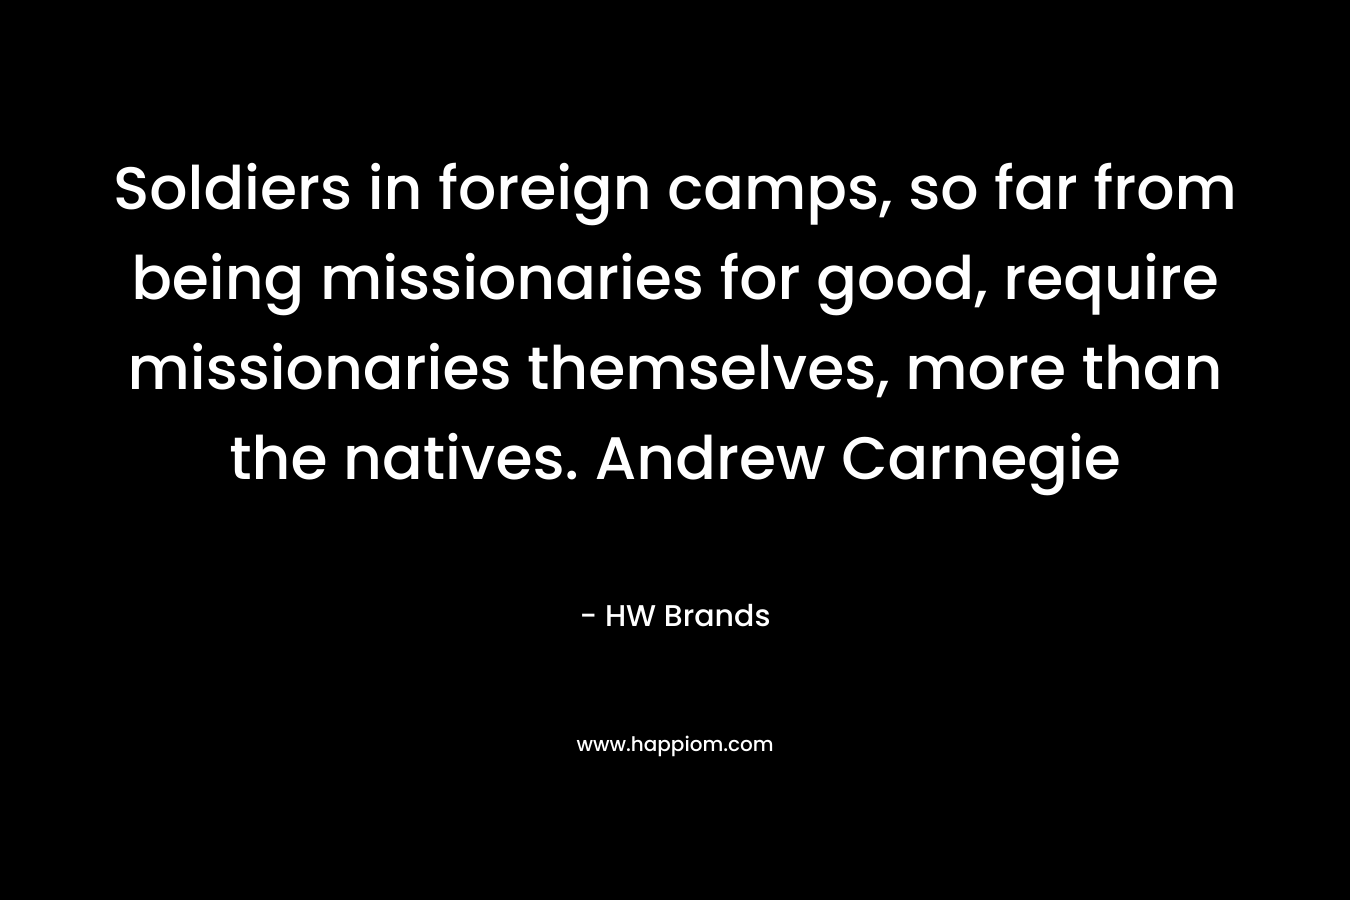 Soldiers in foreign camps, so far from being missionaries for good, require missionaries themselves, more than the natives. Andrew Carnegie – HW Brands